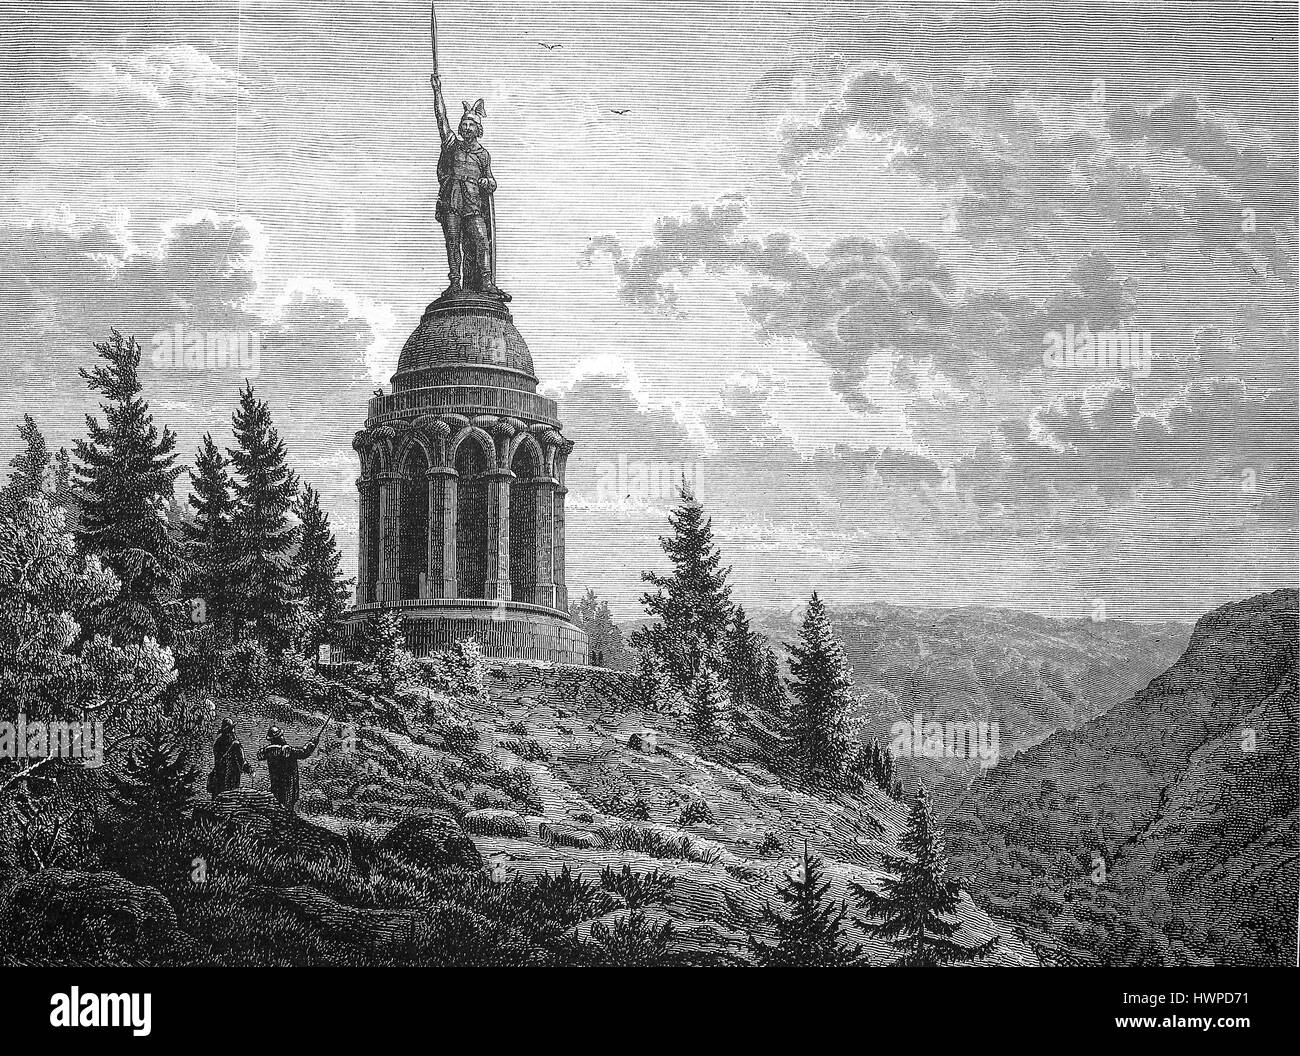 The Hermann - monument on the Treutberg, the Hermann monument is a colossal statue in the Hermannsdenkmal near Detmold, North Rhine-Westphalia in the southern Teutoburg Forest, Germany, Reproduction of an original woodcut from the year 1882, digital improved Stock Photo